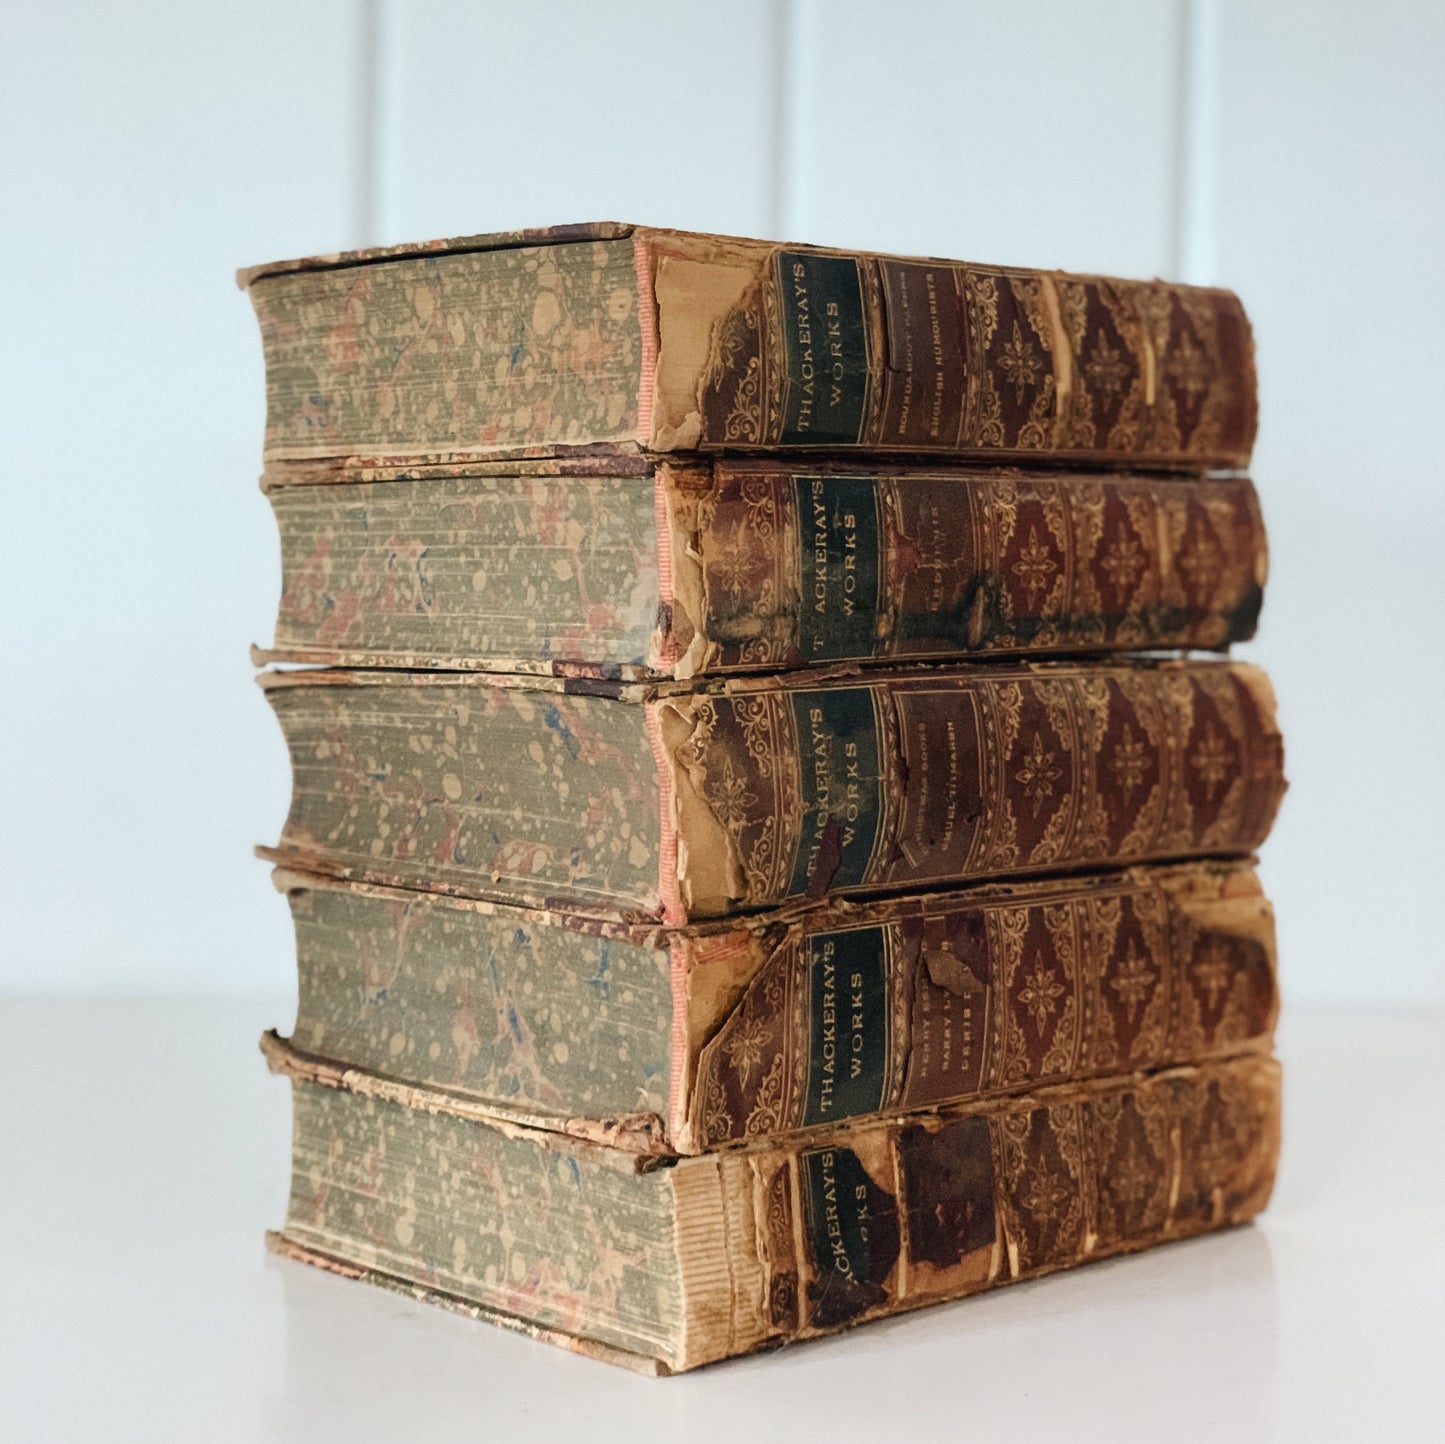 Thackeray’s Complete Works Illustrated, 1859, Shabby Distressed Antique Leather Books